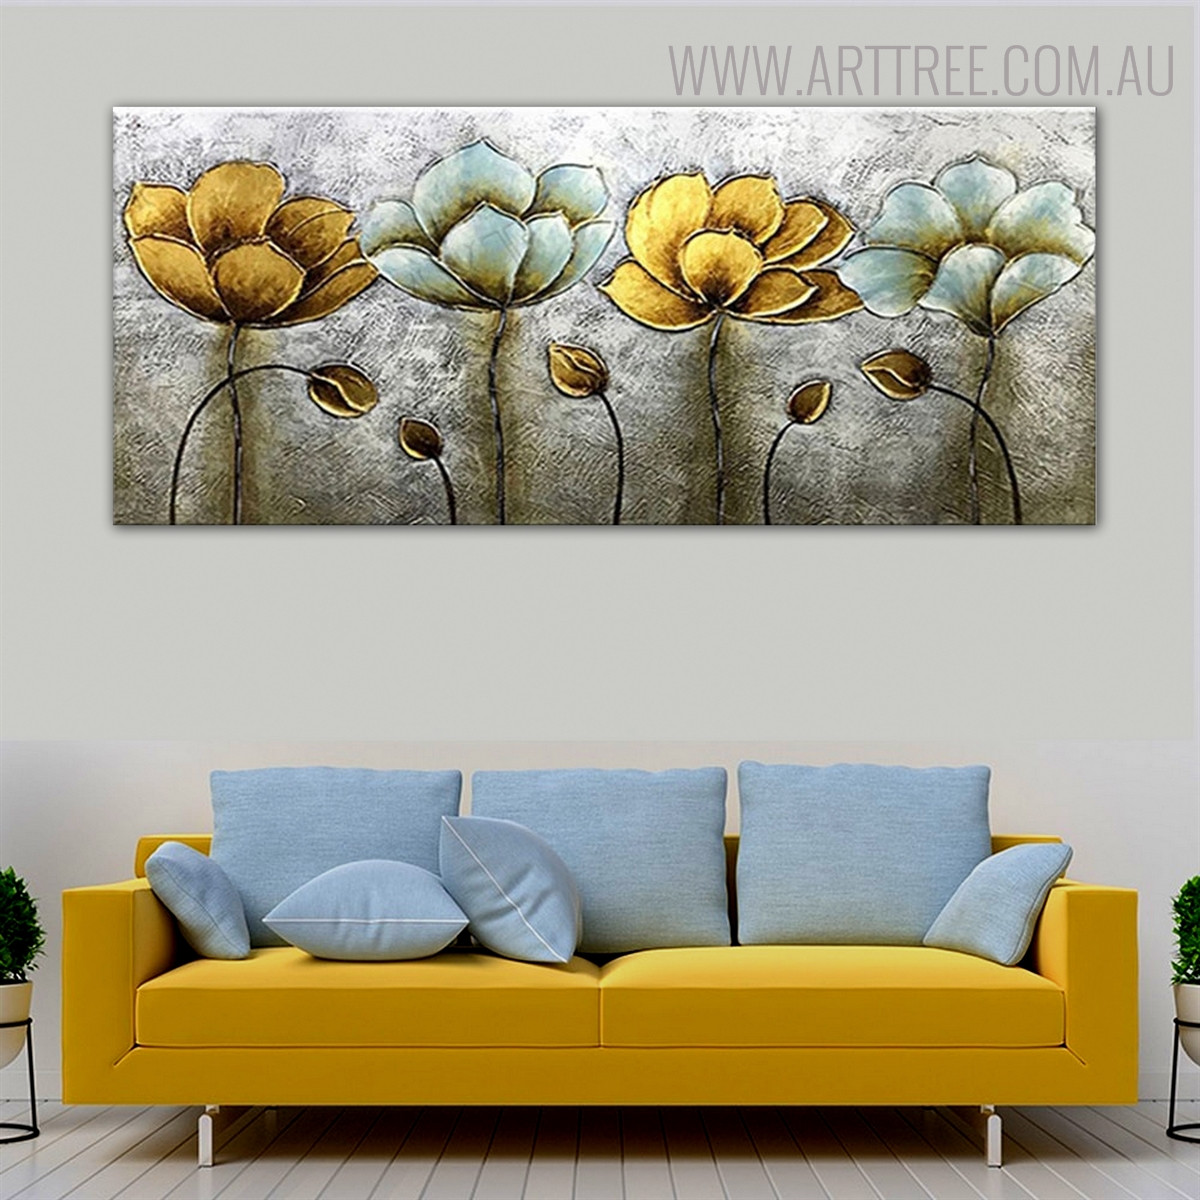 Flower Gusset Abstract Floral Texture Framed Handmade Canvas Artwork for Room Wall Adornment